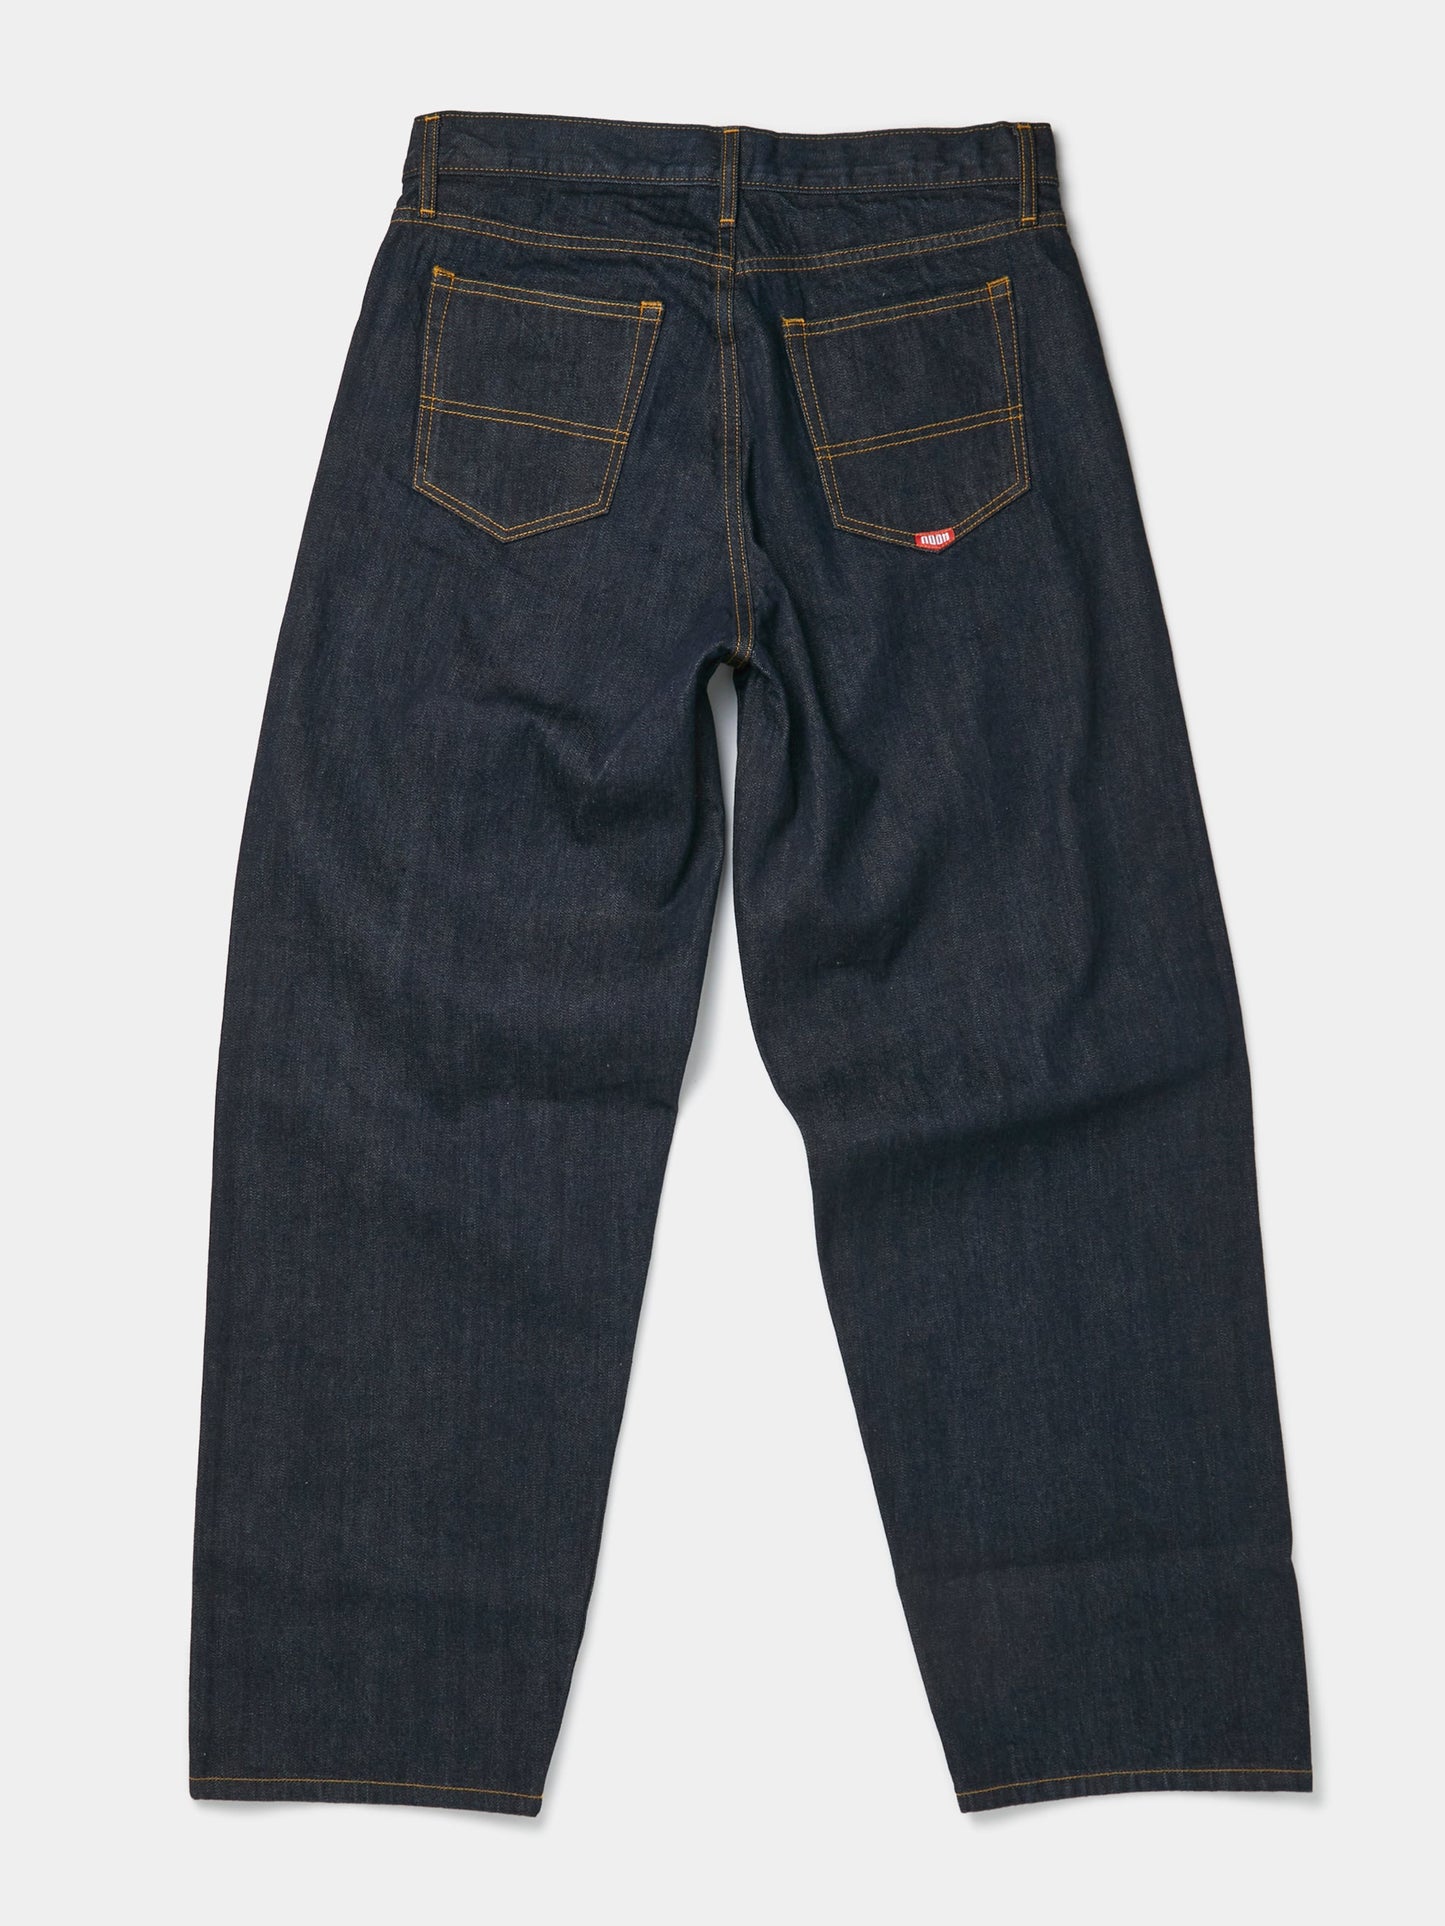 Stovepipe Jeans